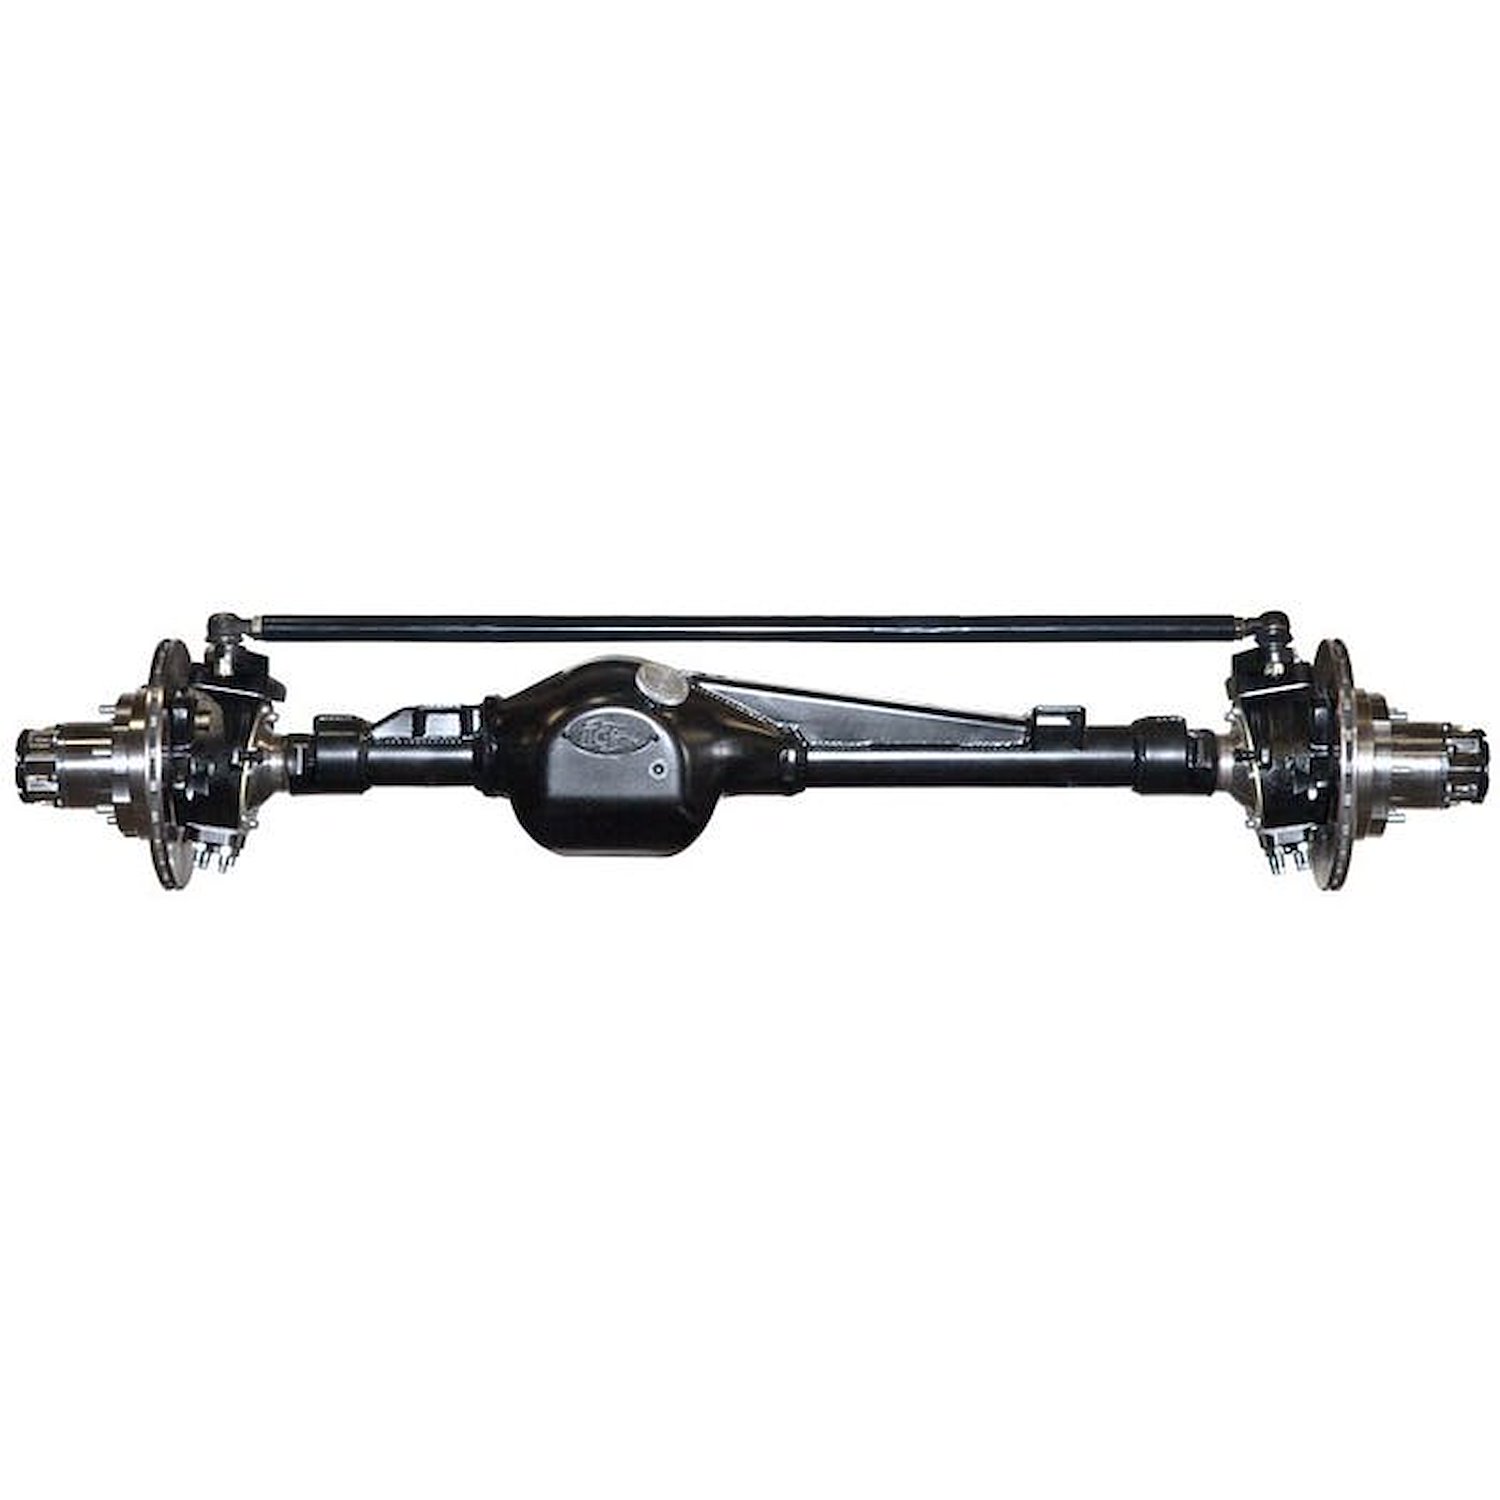 301655-1-KIT Rock Assault Fully-Built Front Axles, +5 Width, LHD, High-Pinion, 4.88, Grizzly, Locking Hubs, Toyota